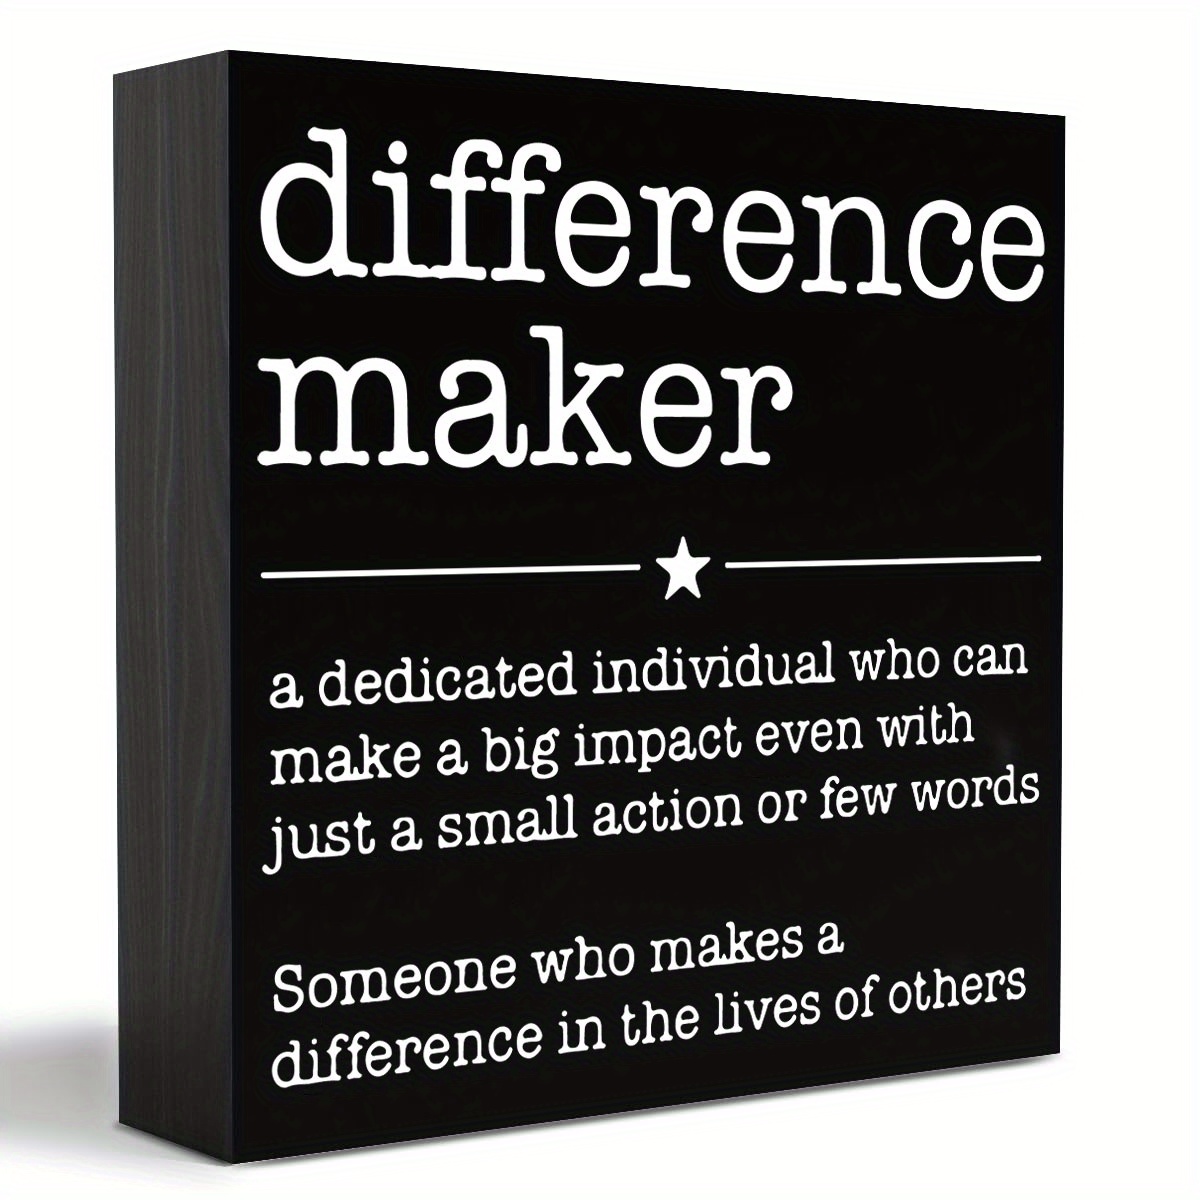 

1pc, Difference Maker Definition Decorative Wooden Box Sign, Thank You Appreciation Gift For Teacher Boss Leader Coworker Wood Block Plaque Desk Decor Office Shelf Or Wall Display